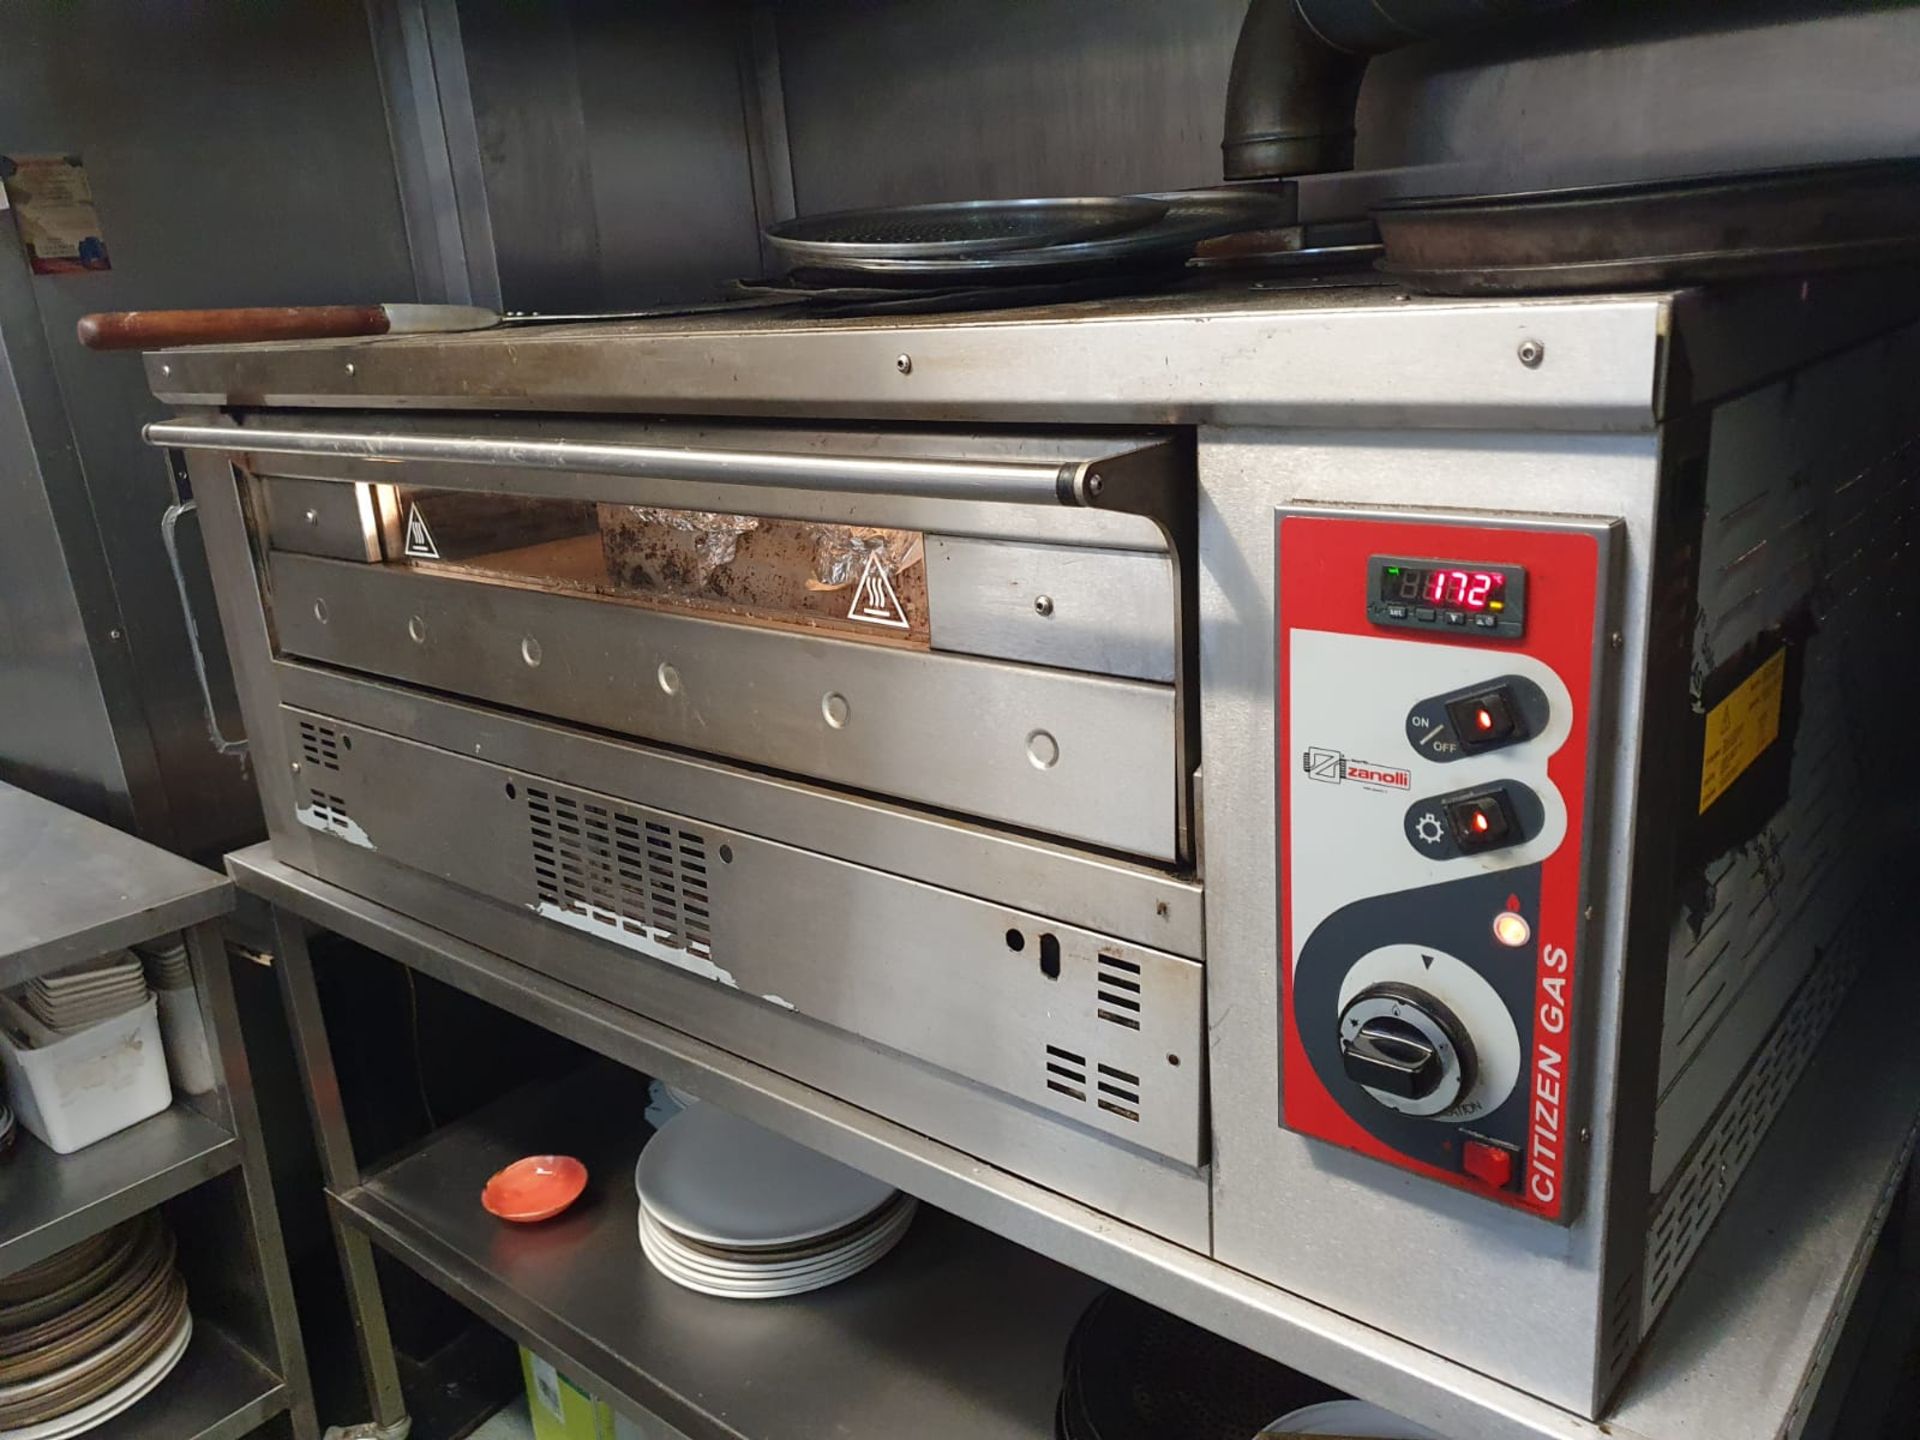 1 x Zanolli Citizen Gas Single Deck Pizza Oven - Includes Stainless Steel Stand With Undershelves,